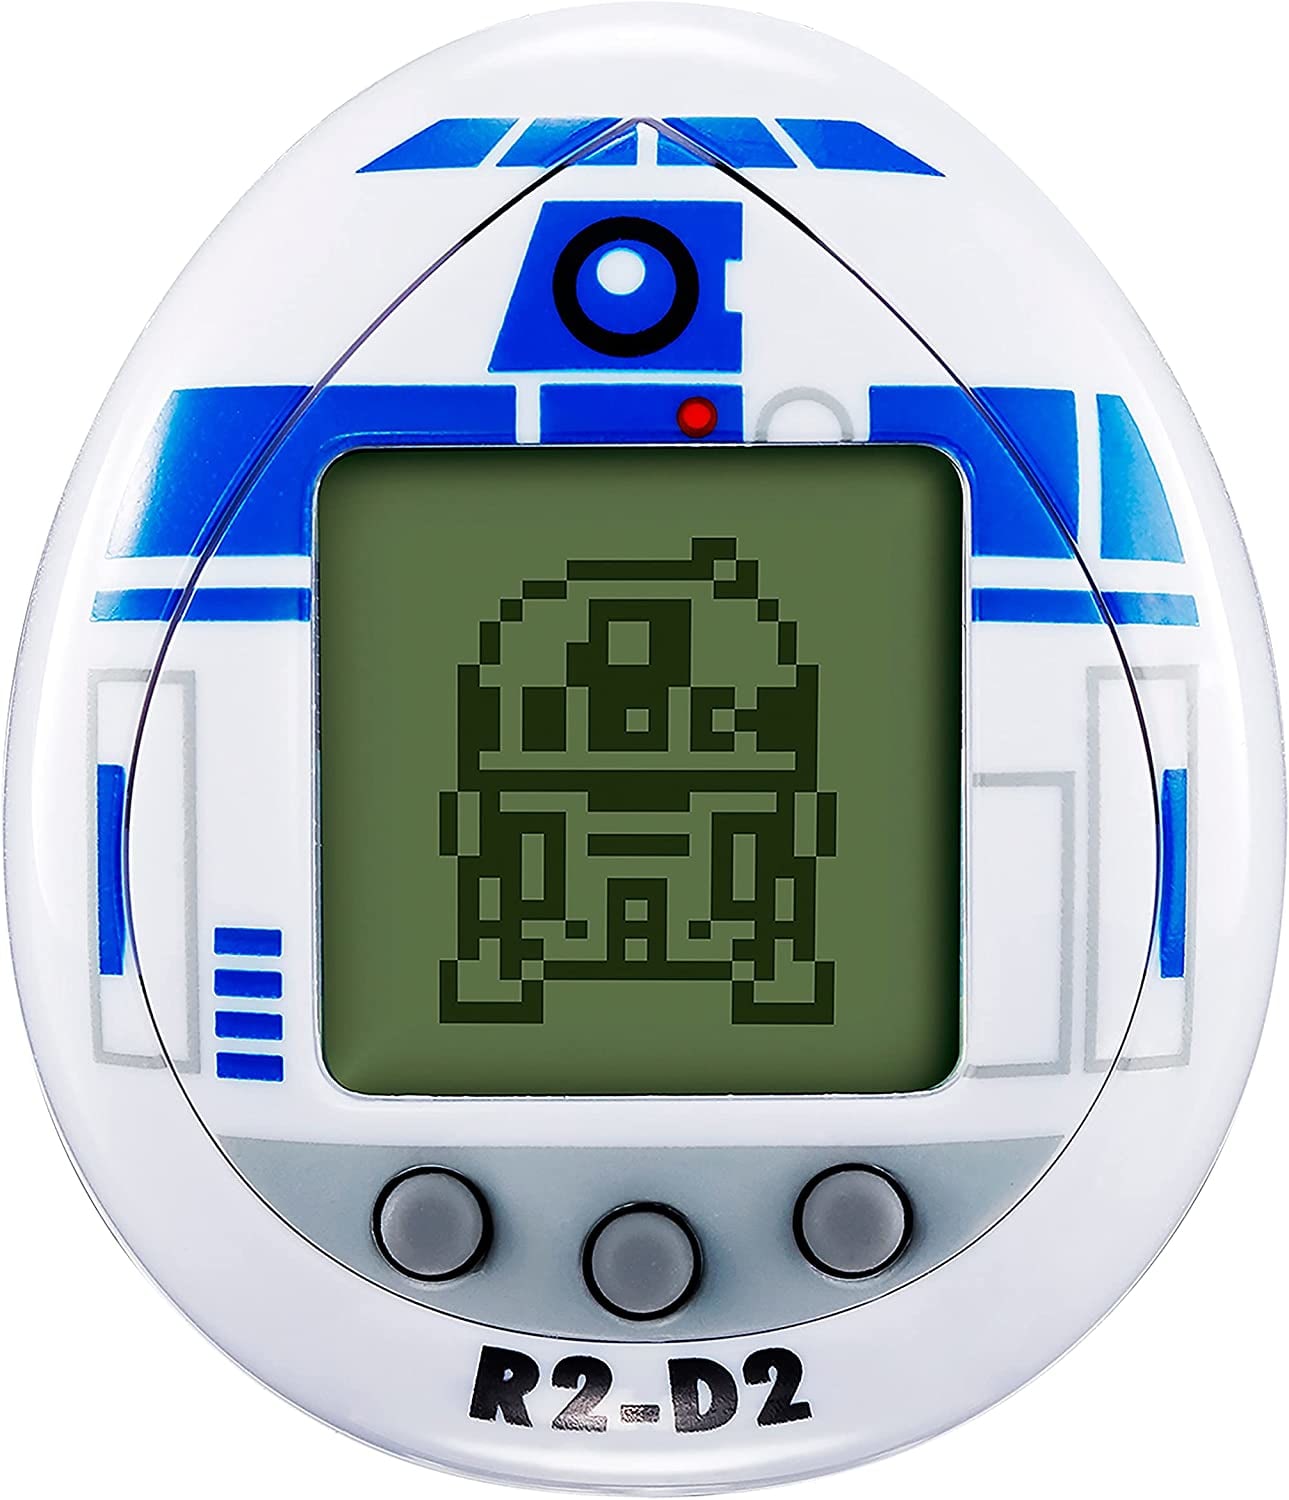 Discover the R2-D2 Tamagotchi from Bandai America on Amazon.